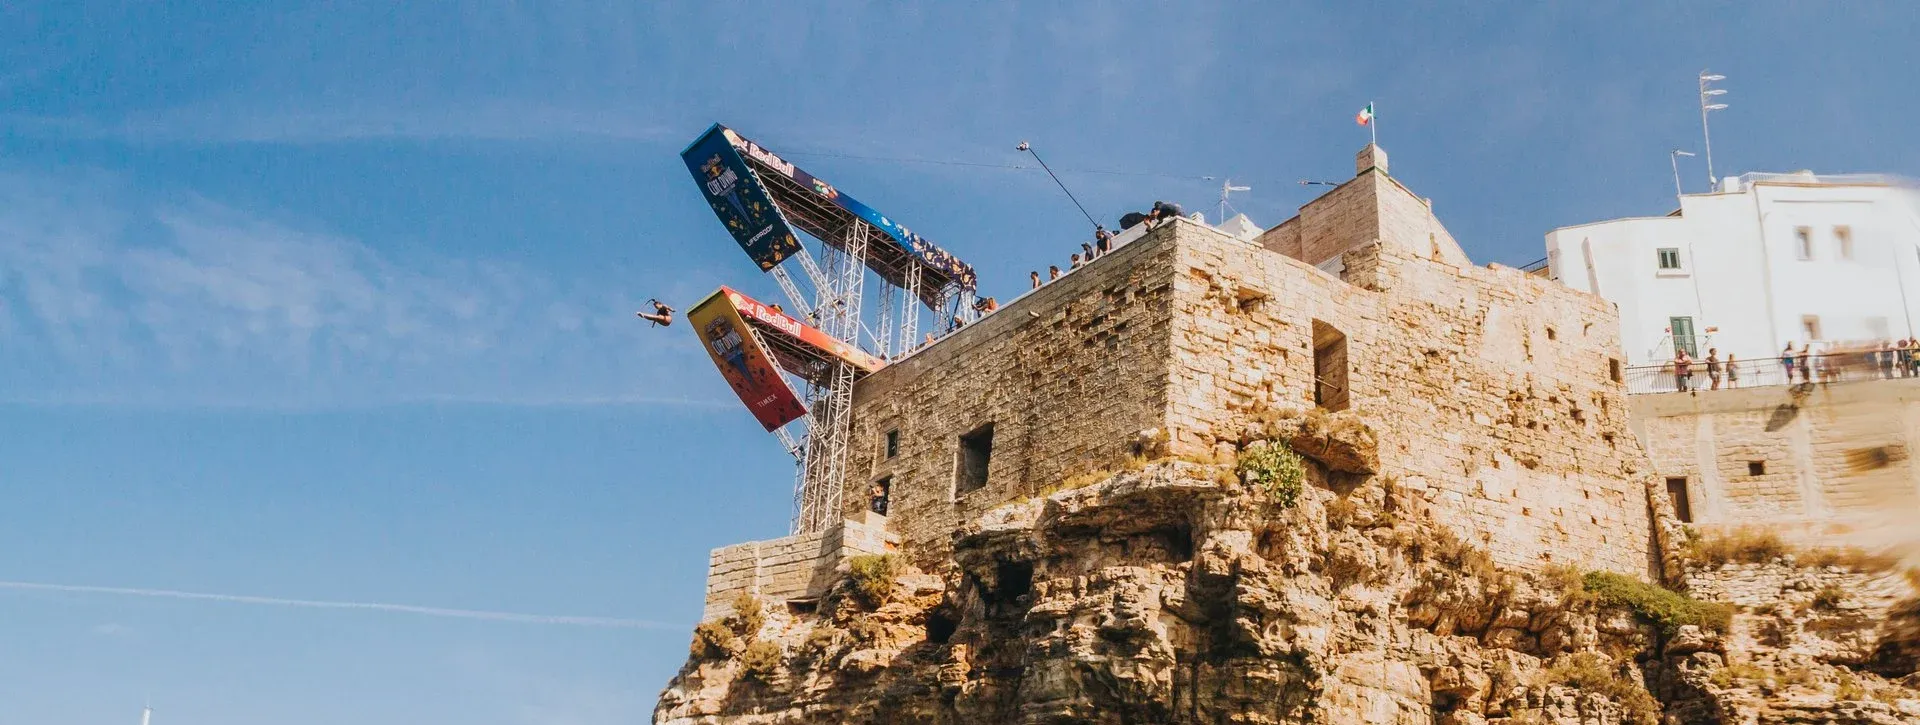 Red Bull Cliff Diving Back to Polignano a mare